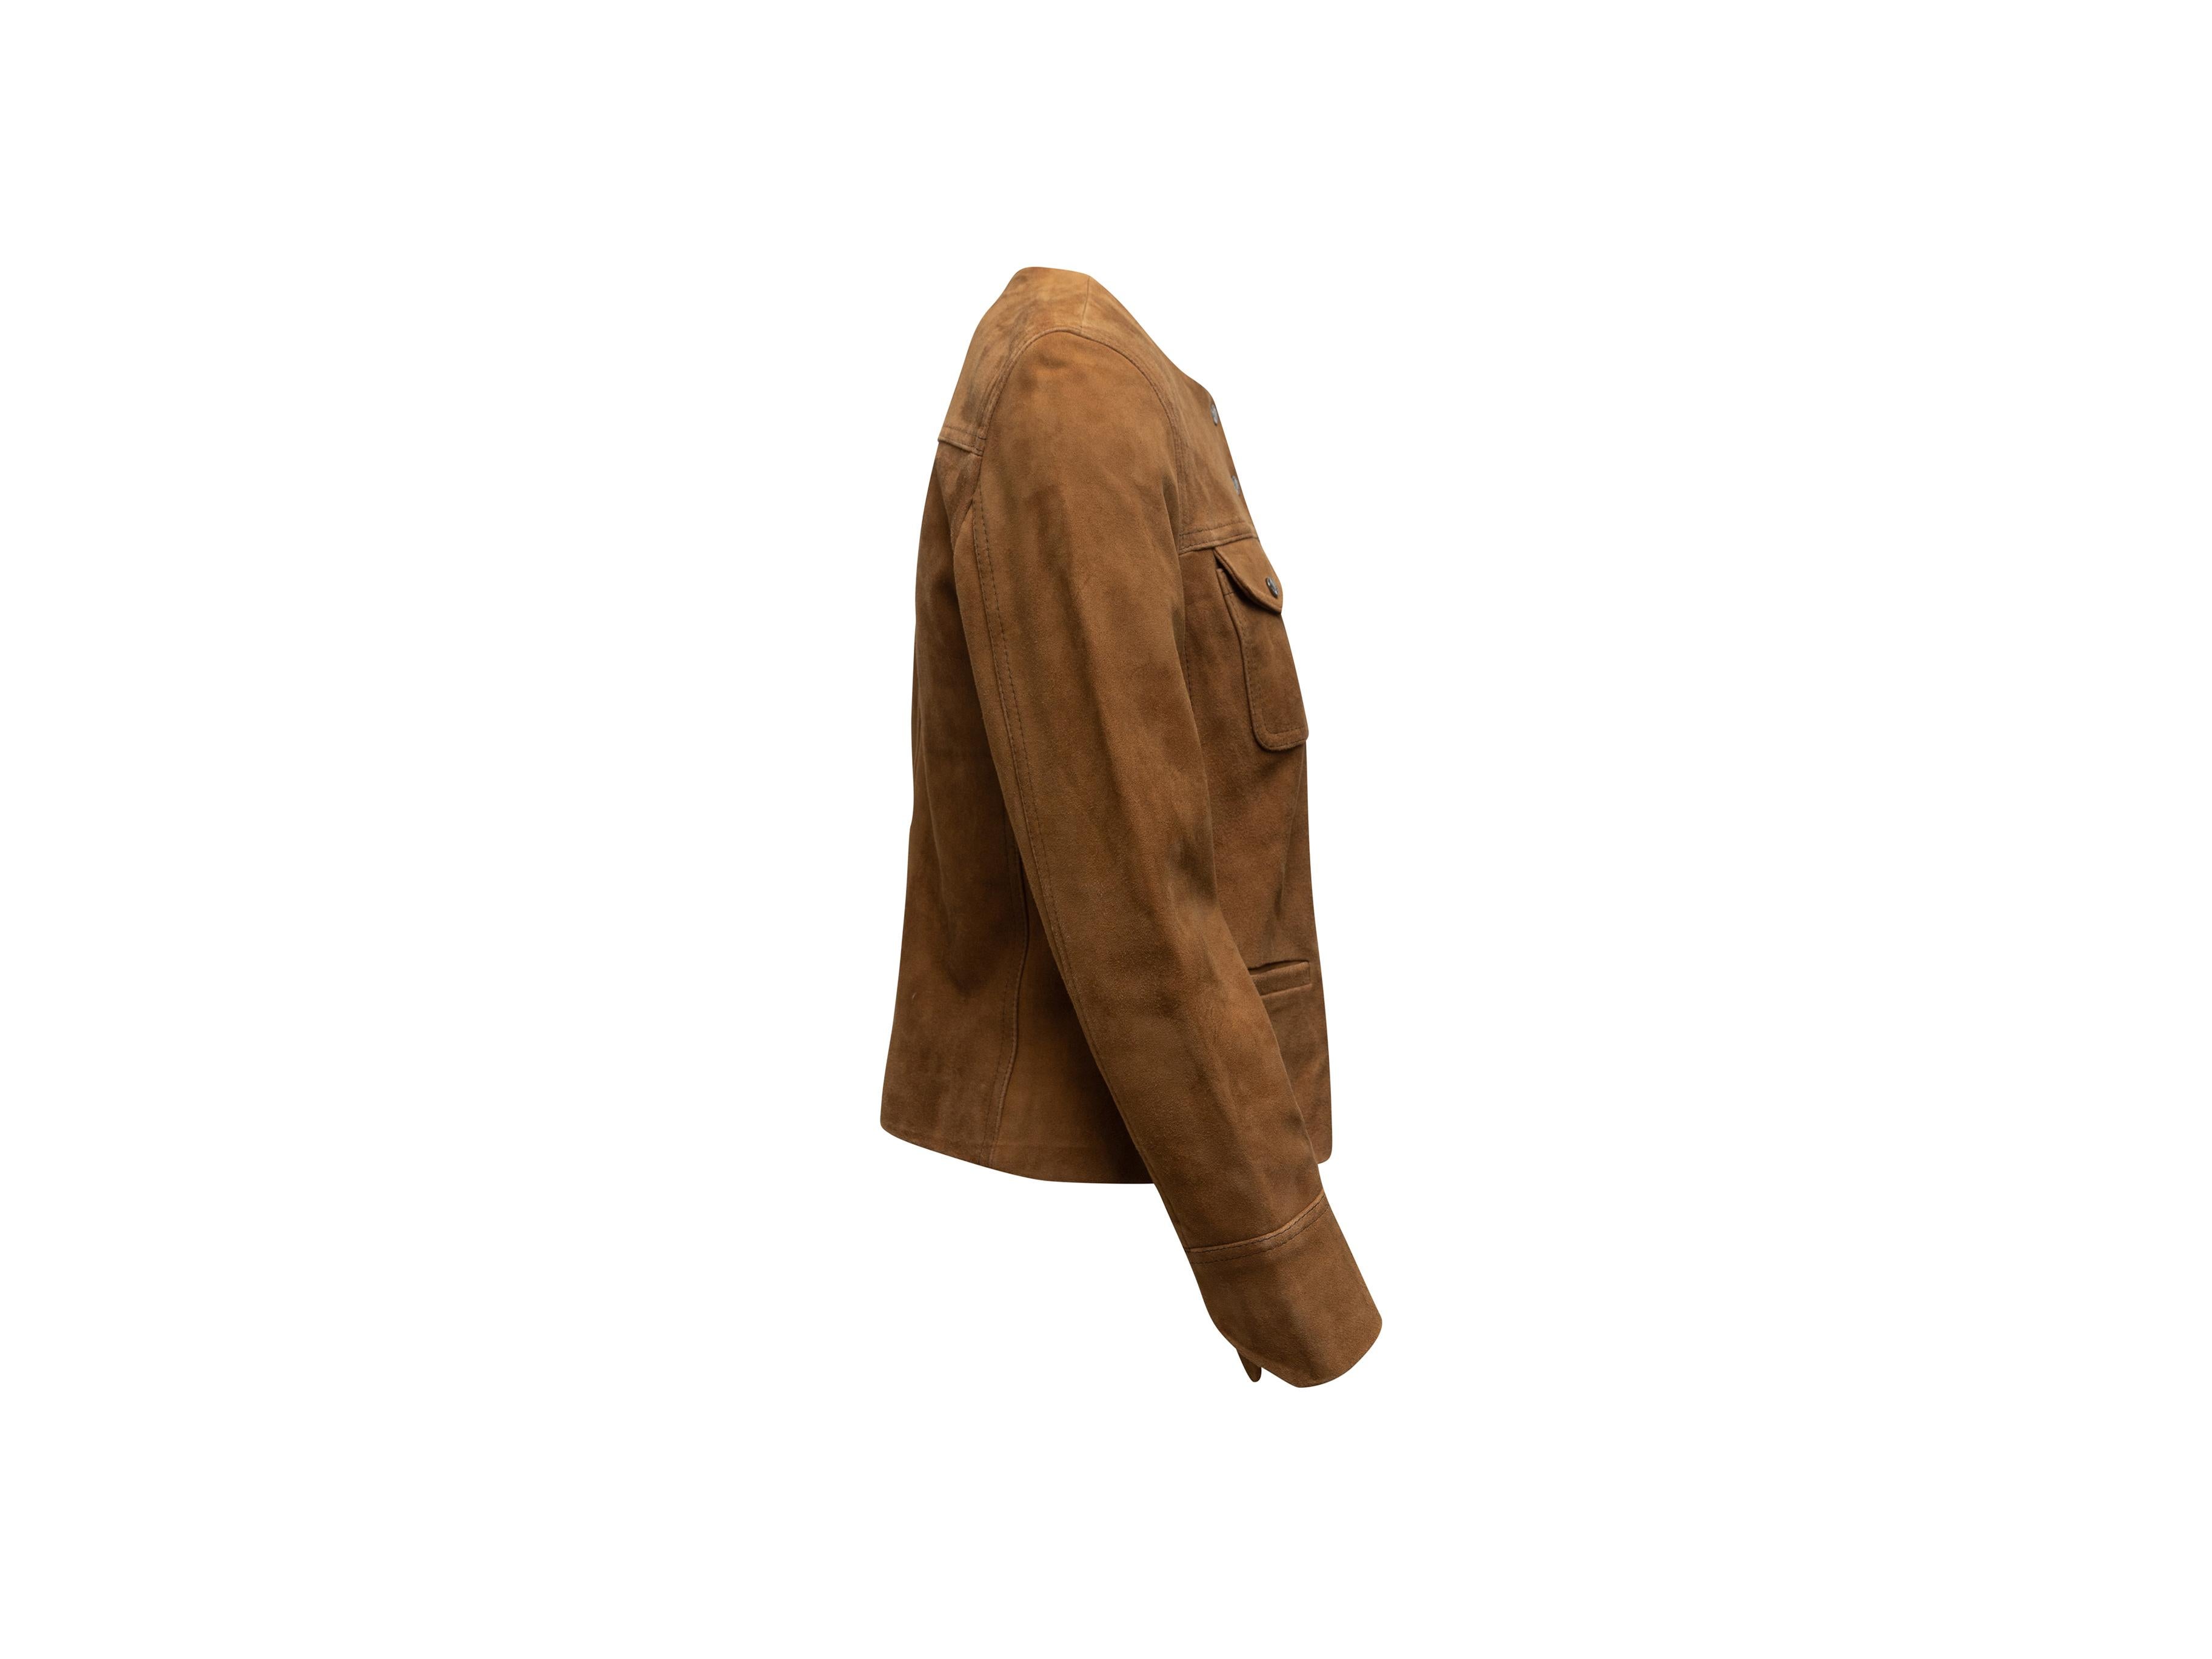 Product details: Tan suede collarless jacket by Zadig & Voltaire. Crew neck. Dual flap pockets at bust. Dual welt pockets at hips. Snap closures at center front. 15